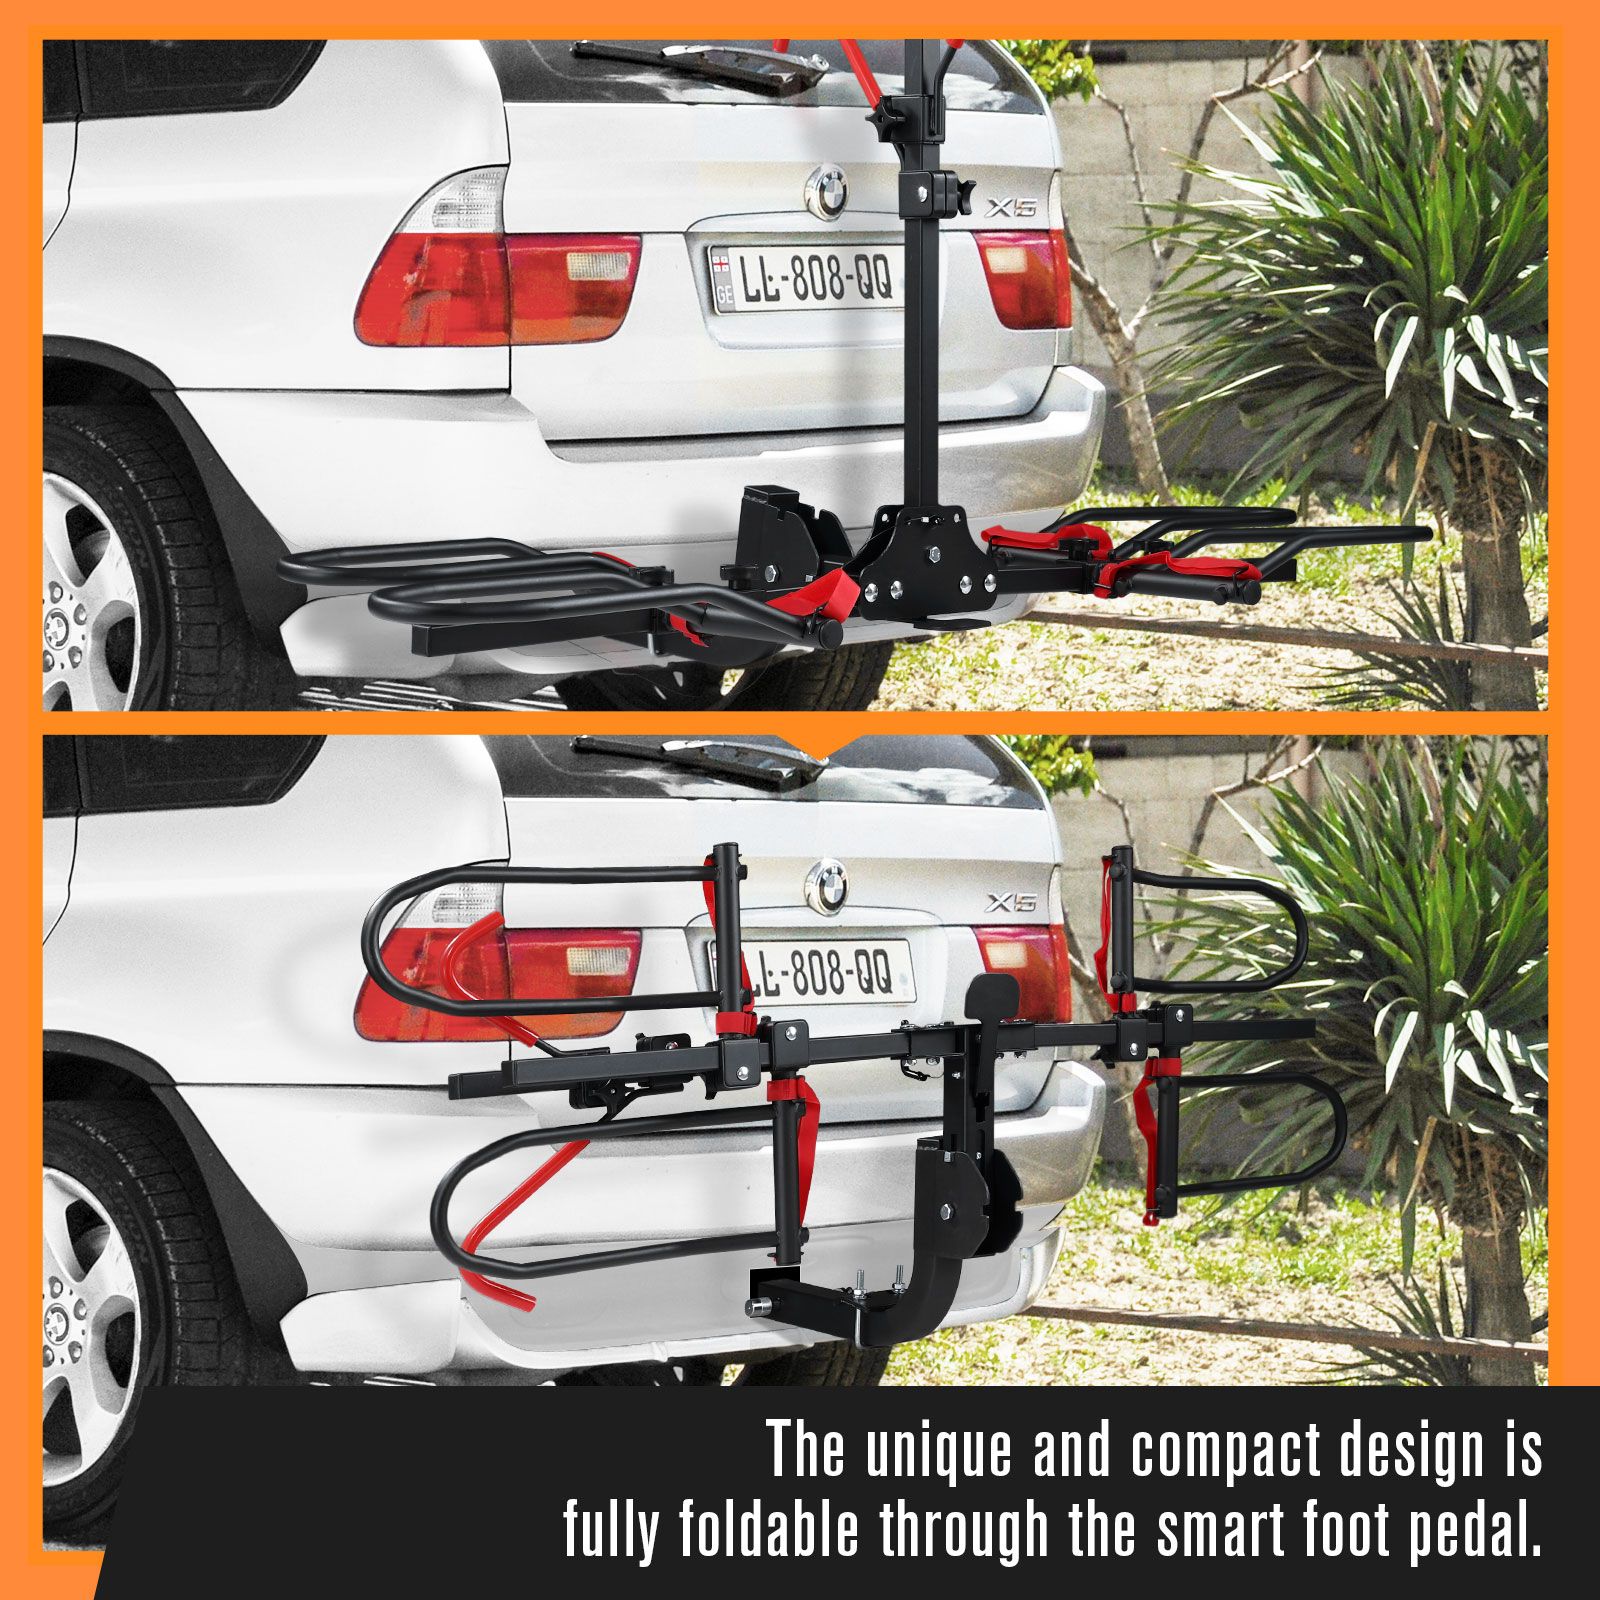 2 Ebike Rack for Car Rear Mountain Bicycle Carrier Mount Stand Storage Holder Platform 2 Inch Foldable Tilt with Lock